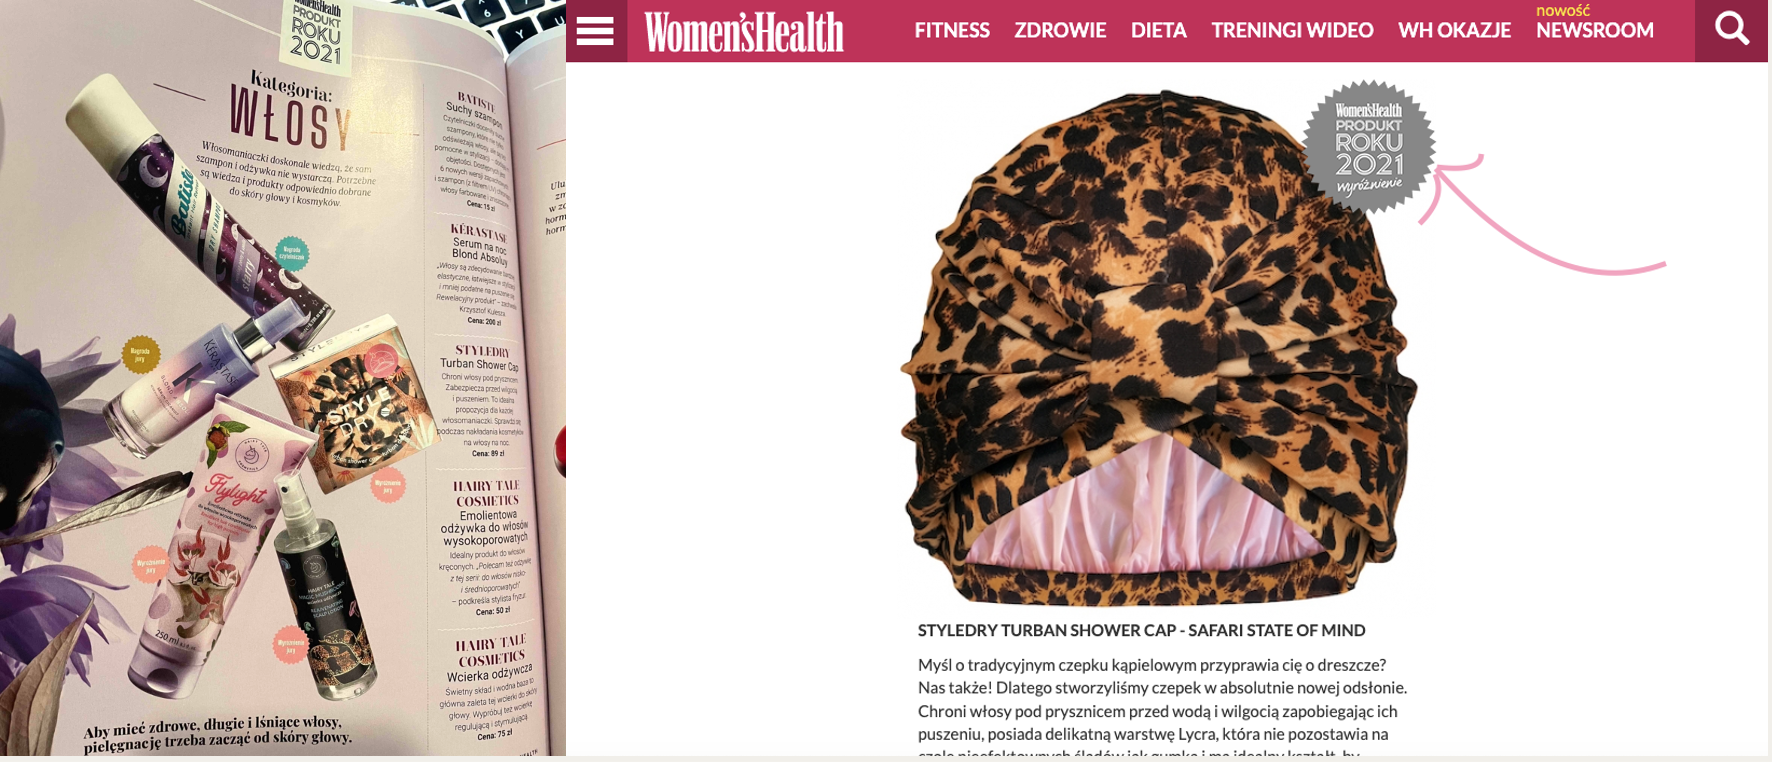 Women’s Health Magazine Poland Product of the Year contest Dec 2021